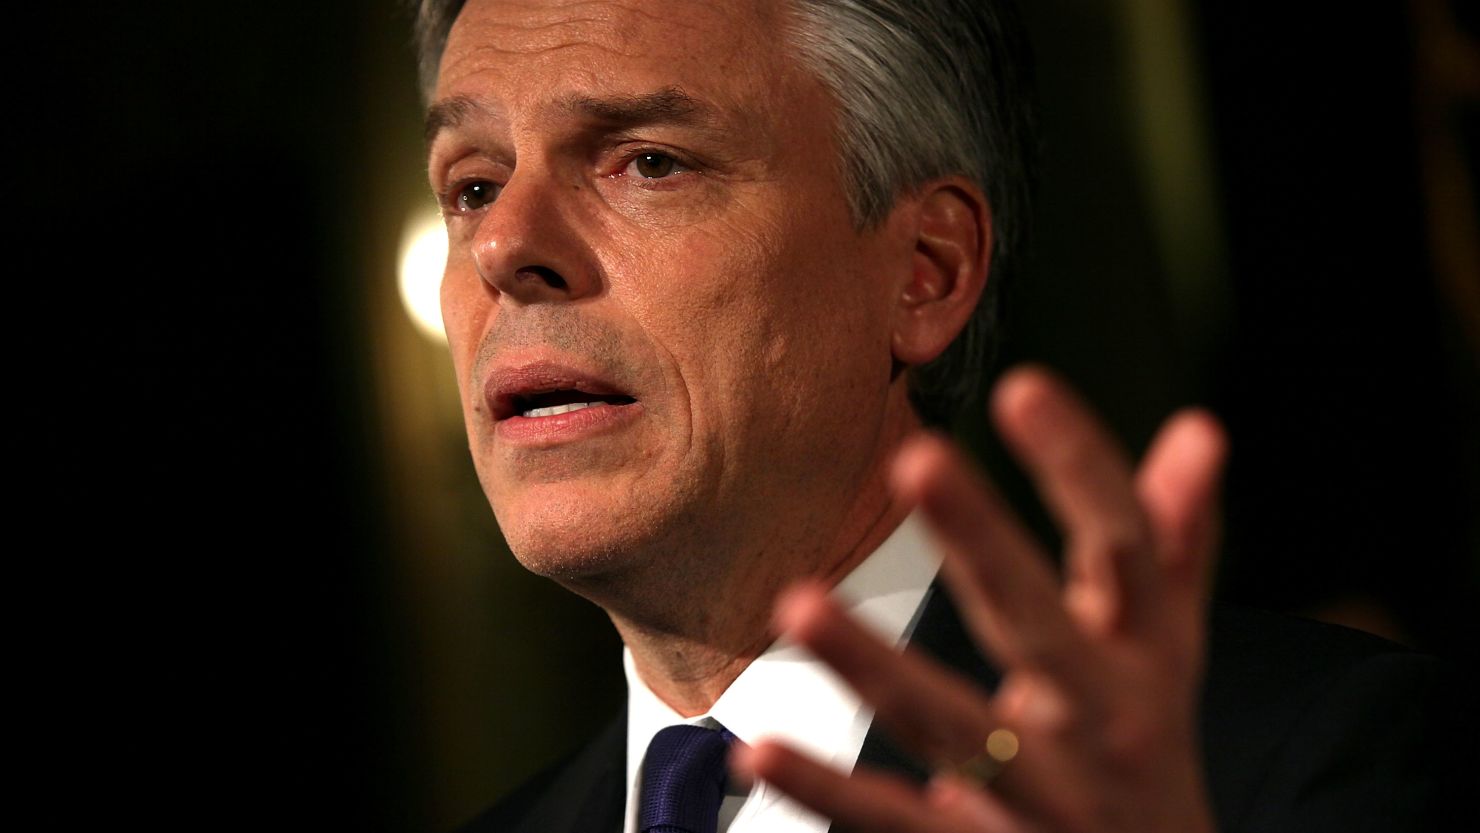 Jon Huntsman speaks to supporters during a primary night rally in New Hampshire on January 10.